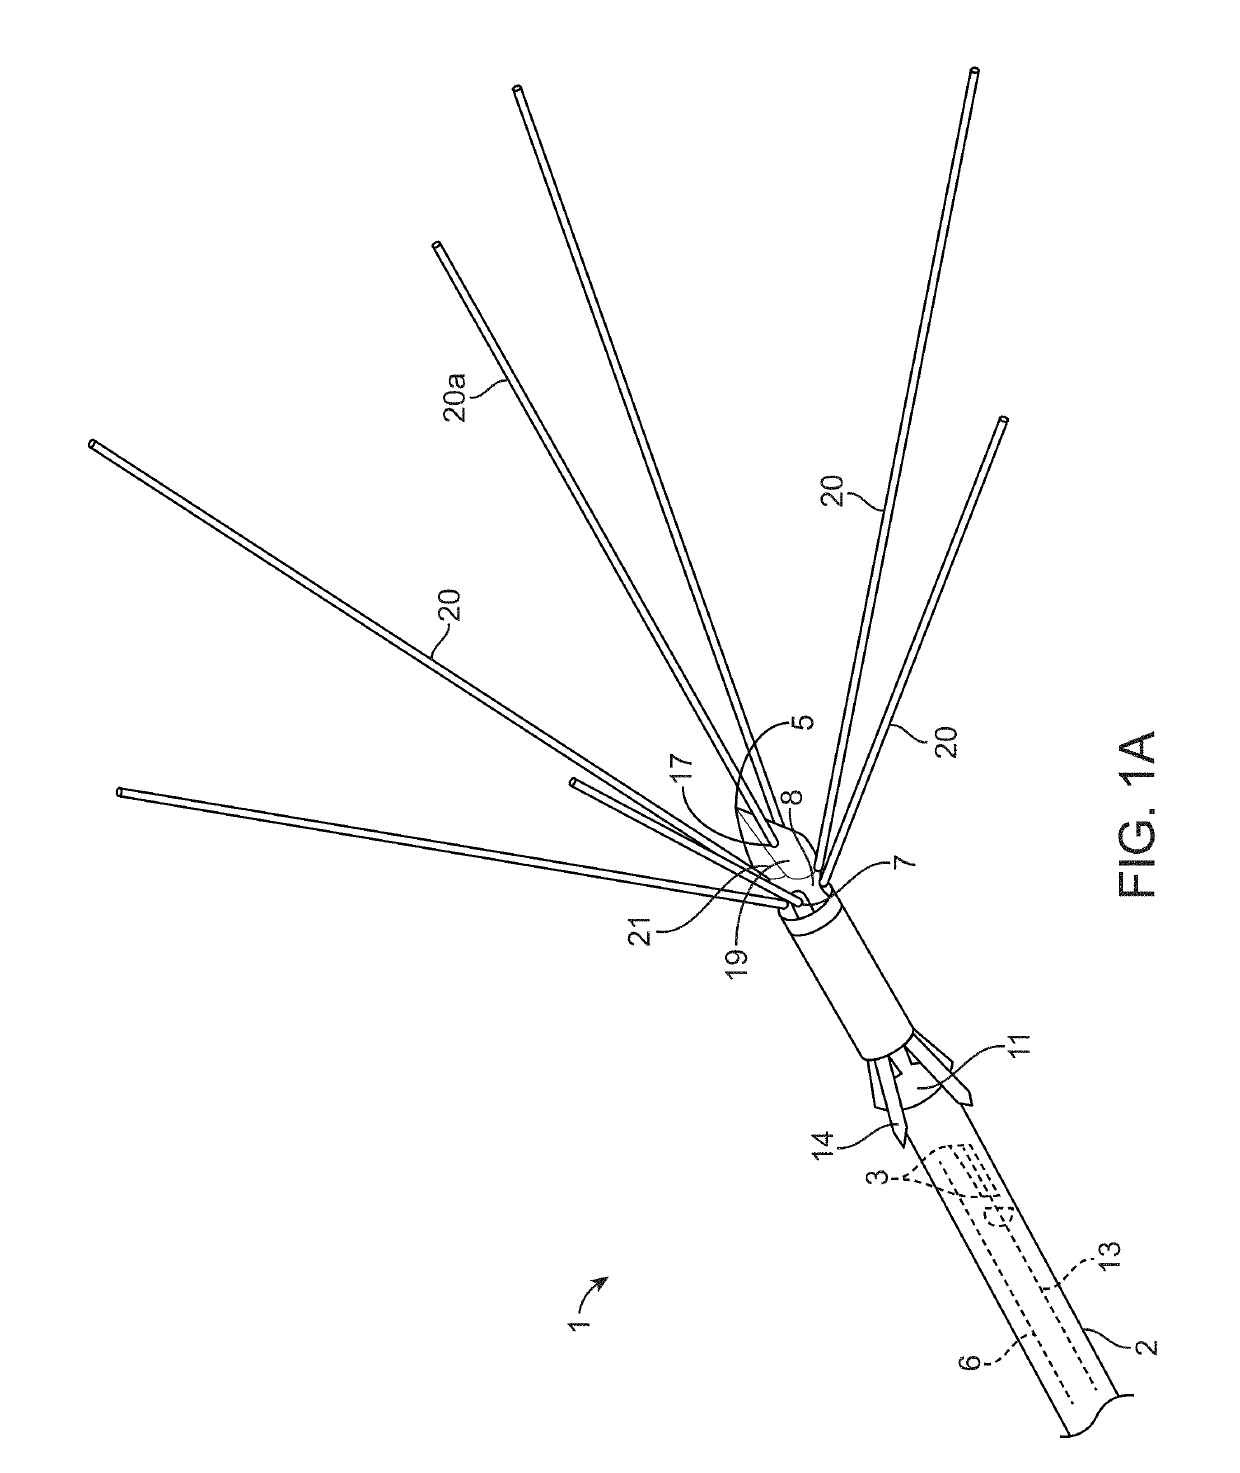 System for controlling ablation treatment and visualization